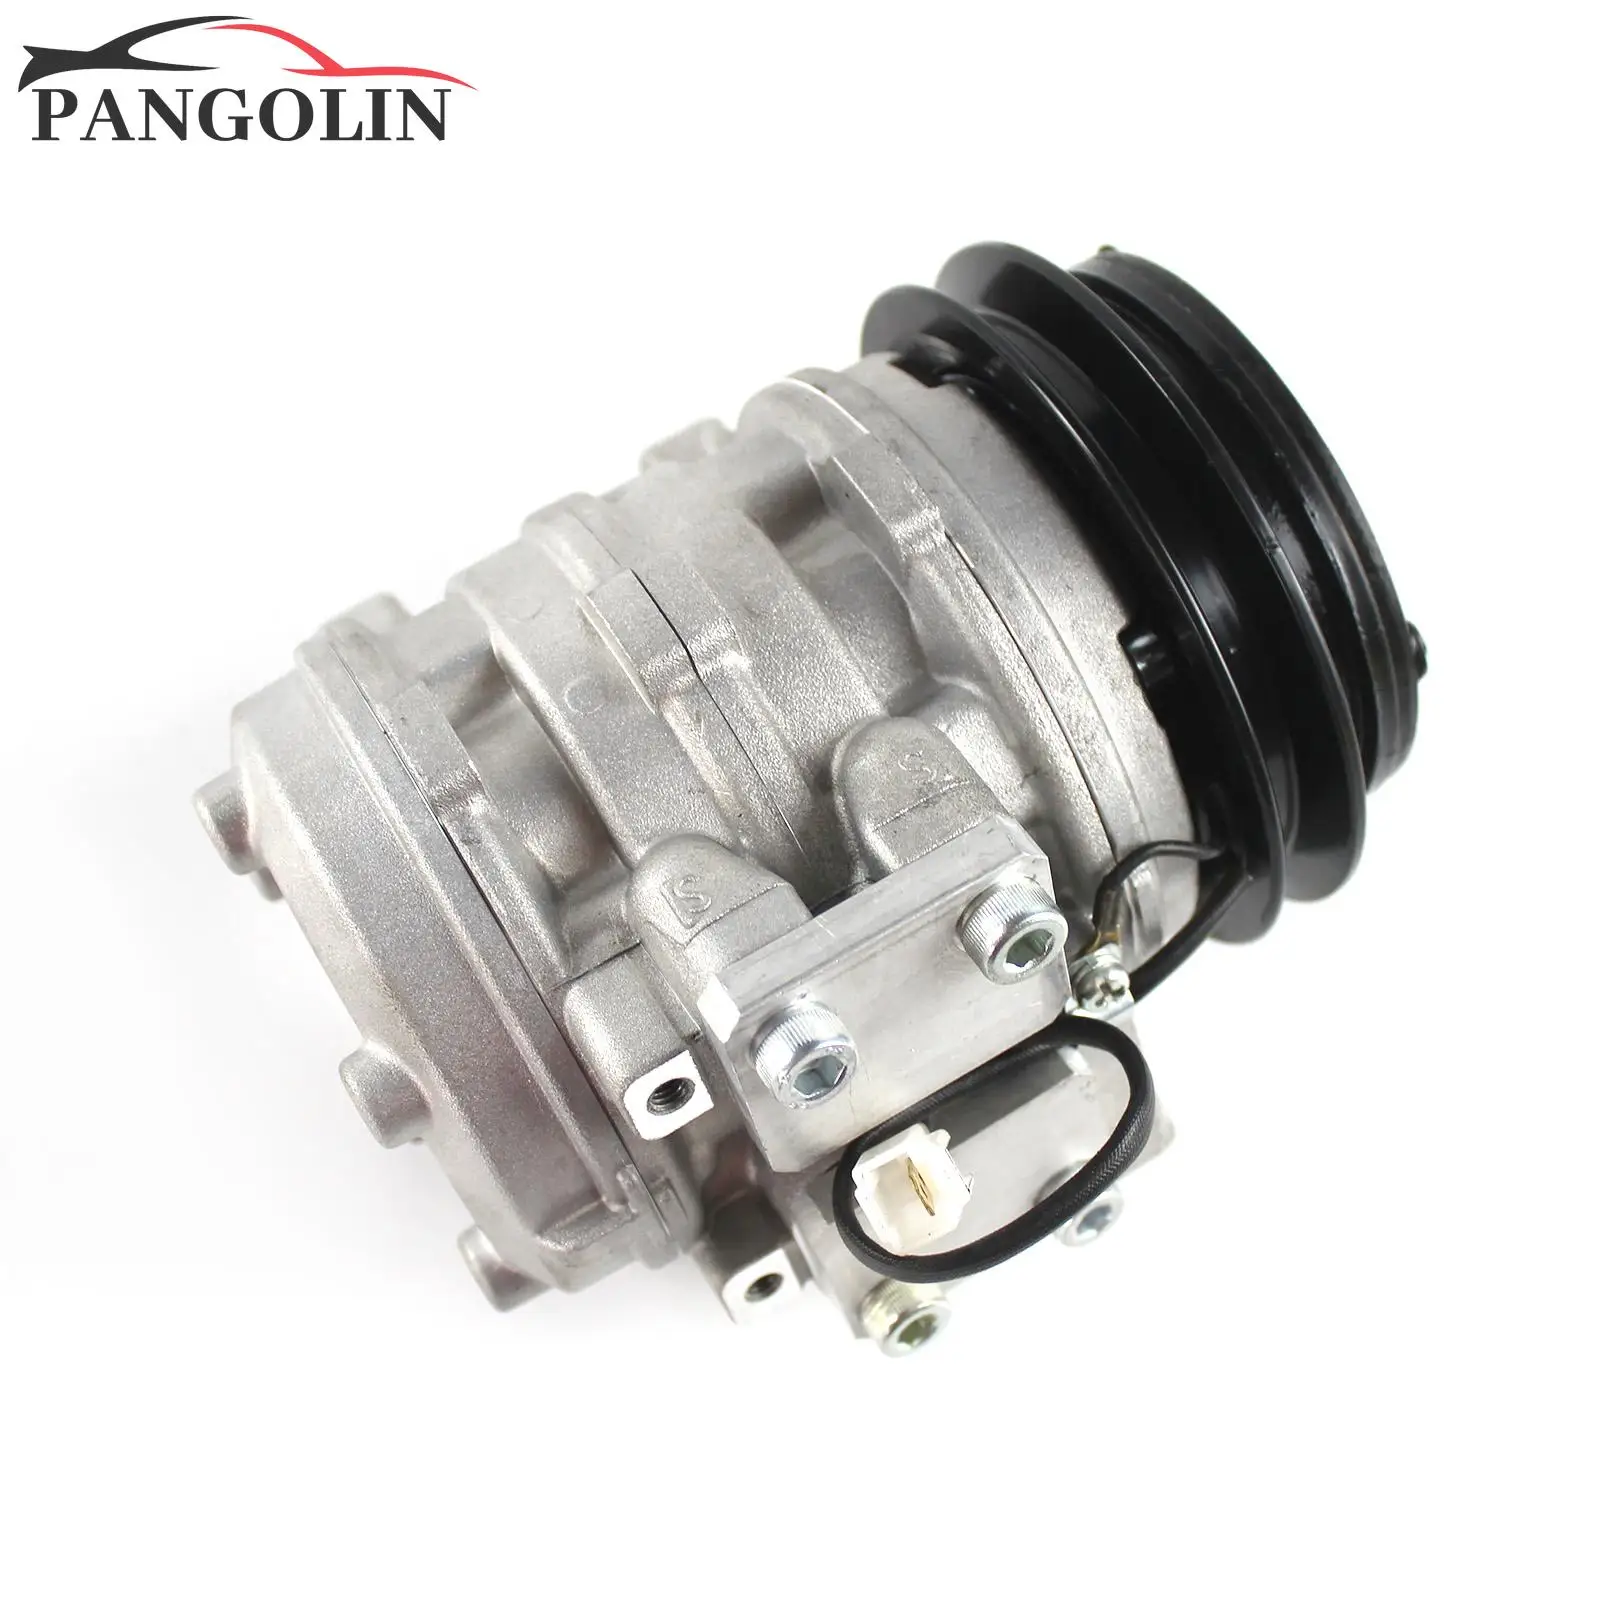 

T0070-87290 12V A/C Compressor Assy with Single Groove Clutch for Kubota L4310DT-GST-C/HST-C L4610DT-HST-C M4900-CAB Tractors